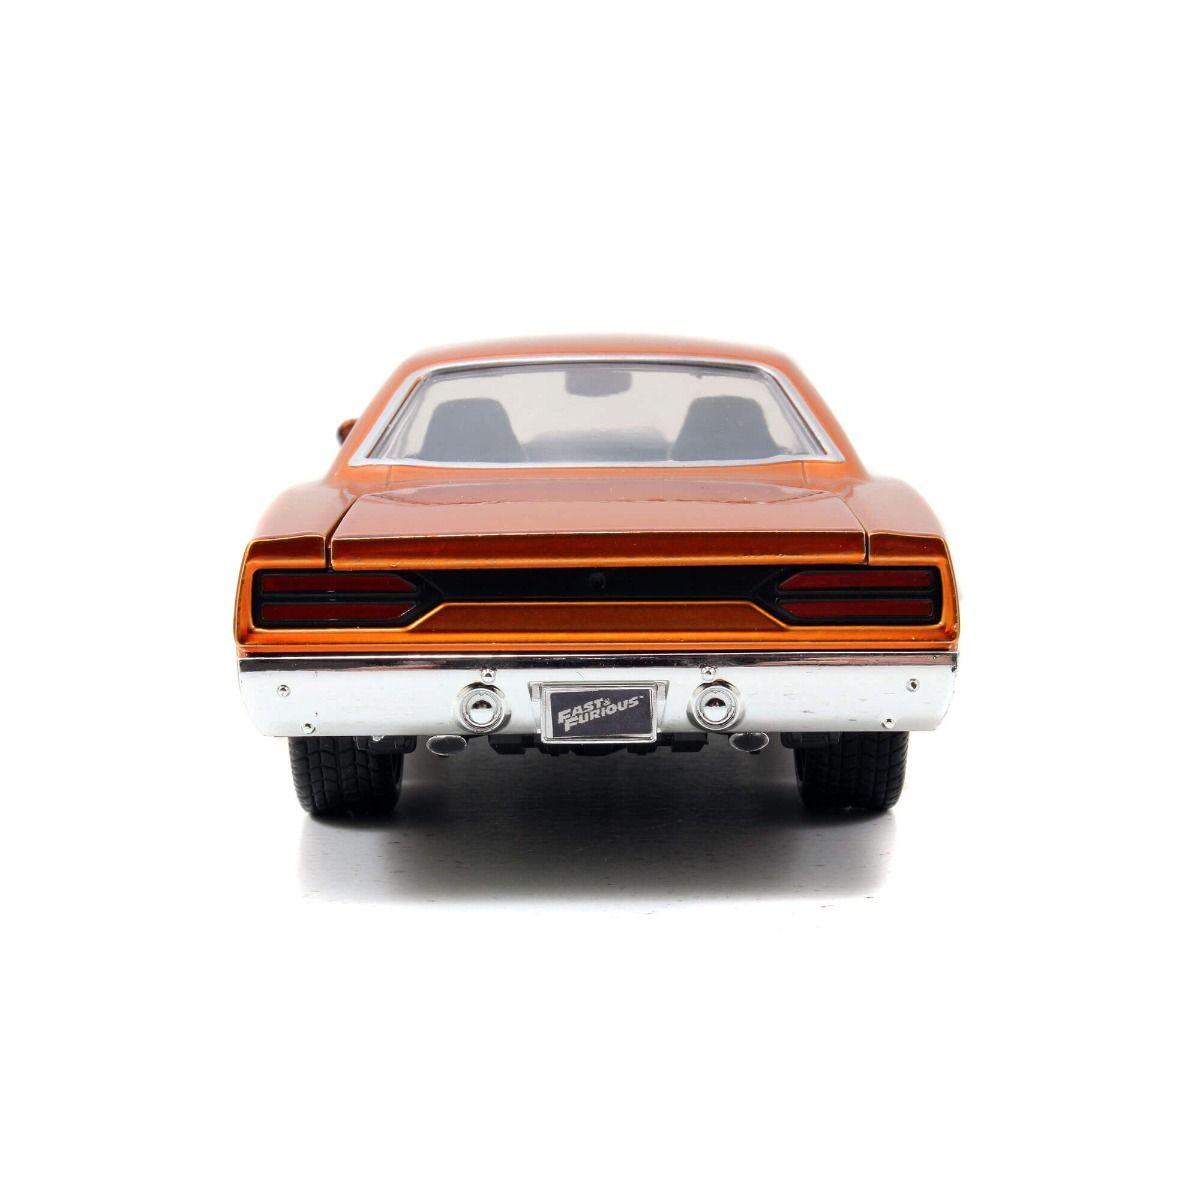 JAD97126 Fast and Furious - '70 Plymouth Road Runner BK 1:24 Scale Hollywood Ride - Jada Toys - Titan Pop Culture